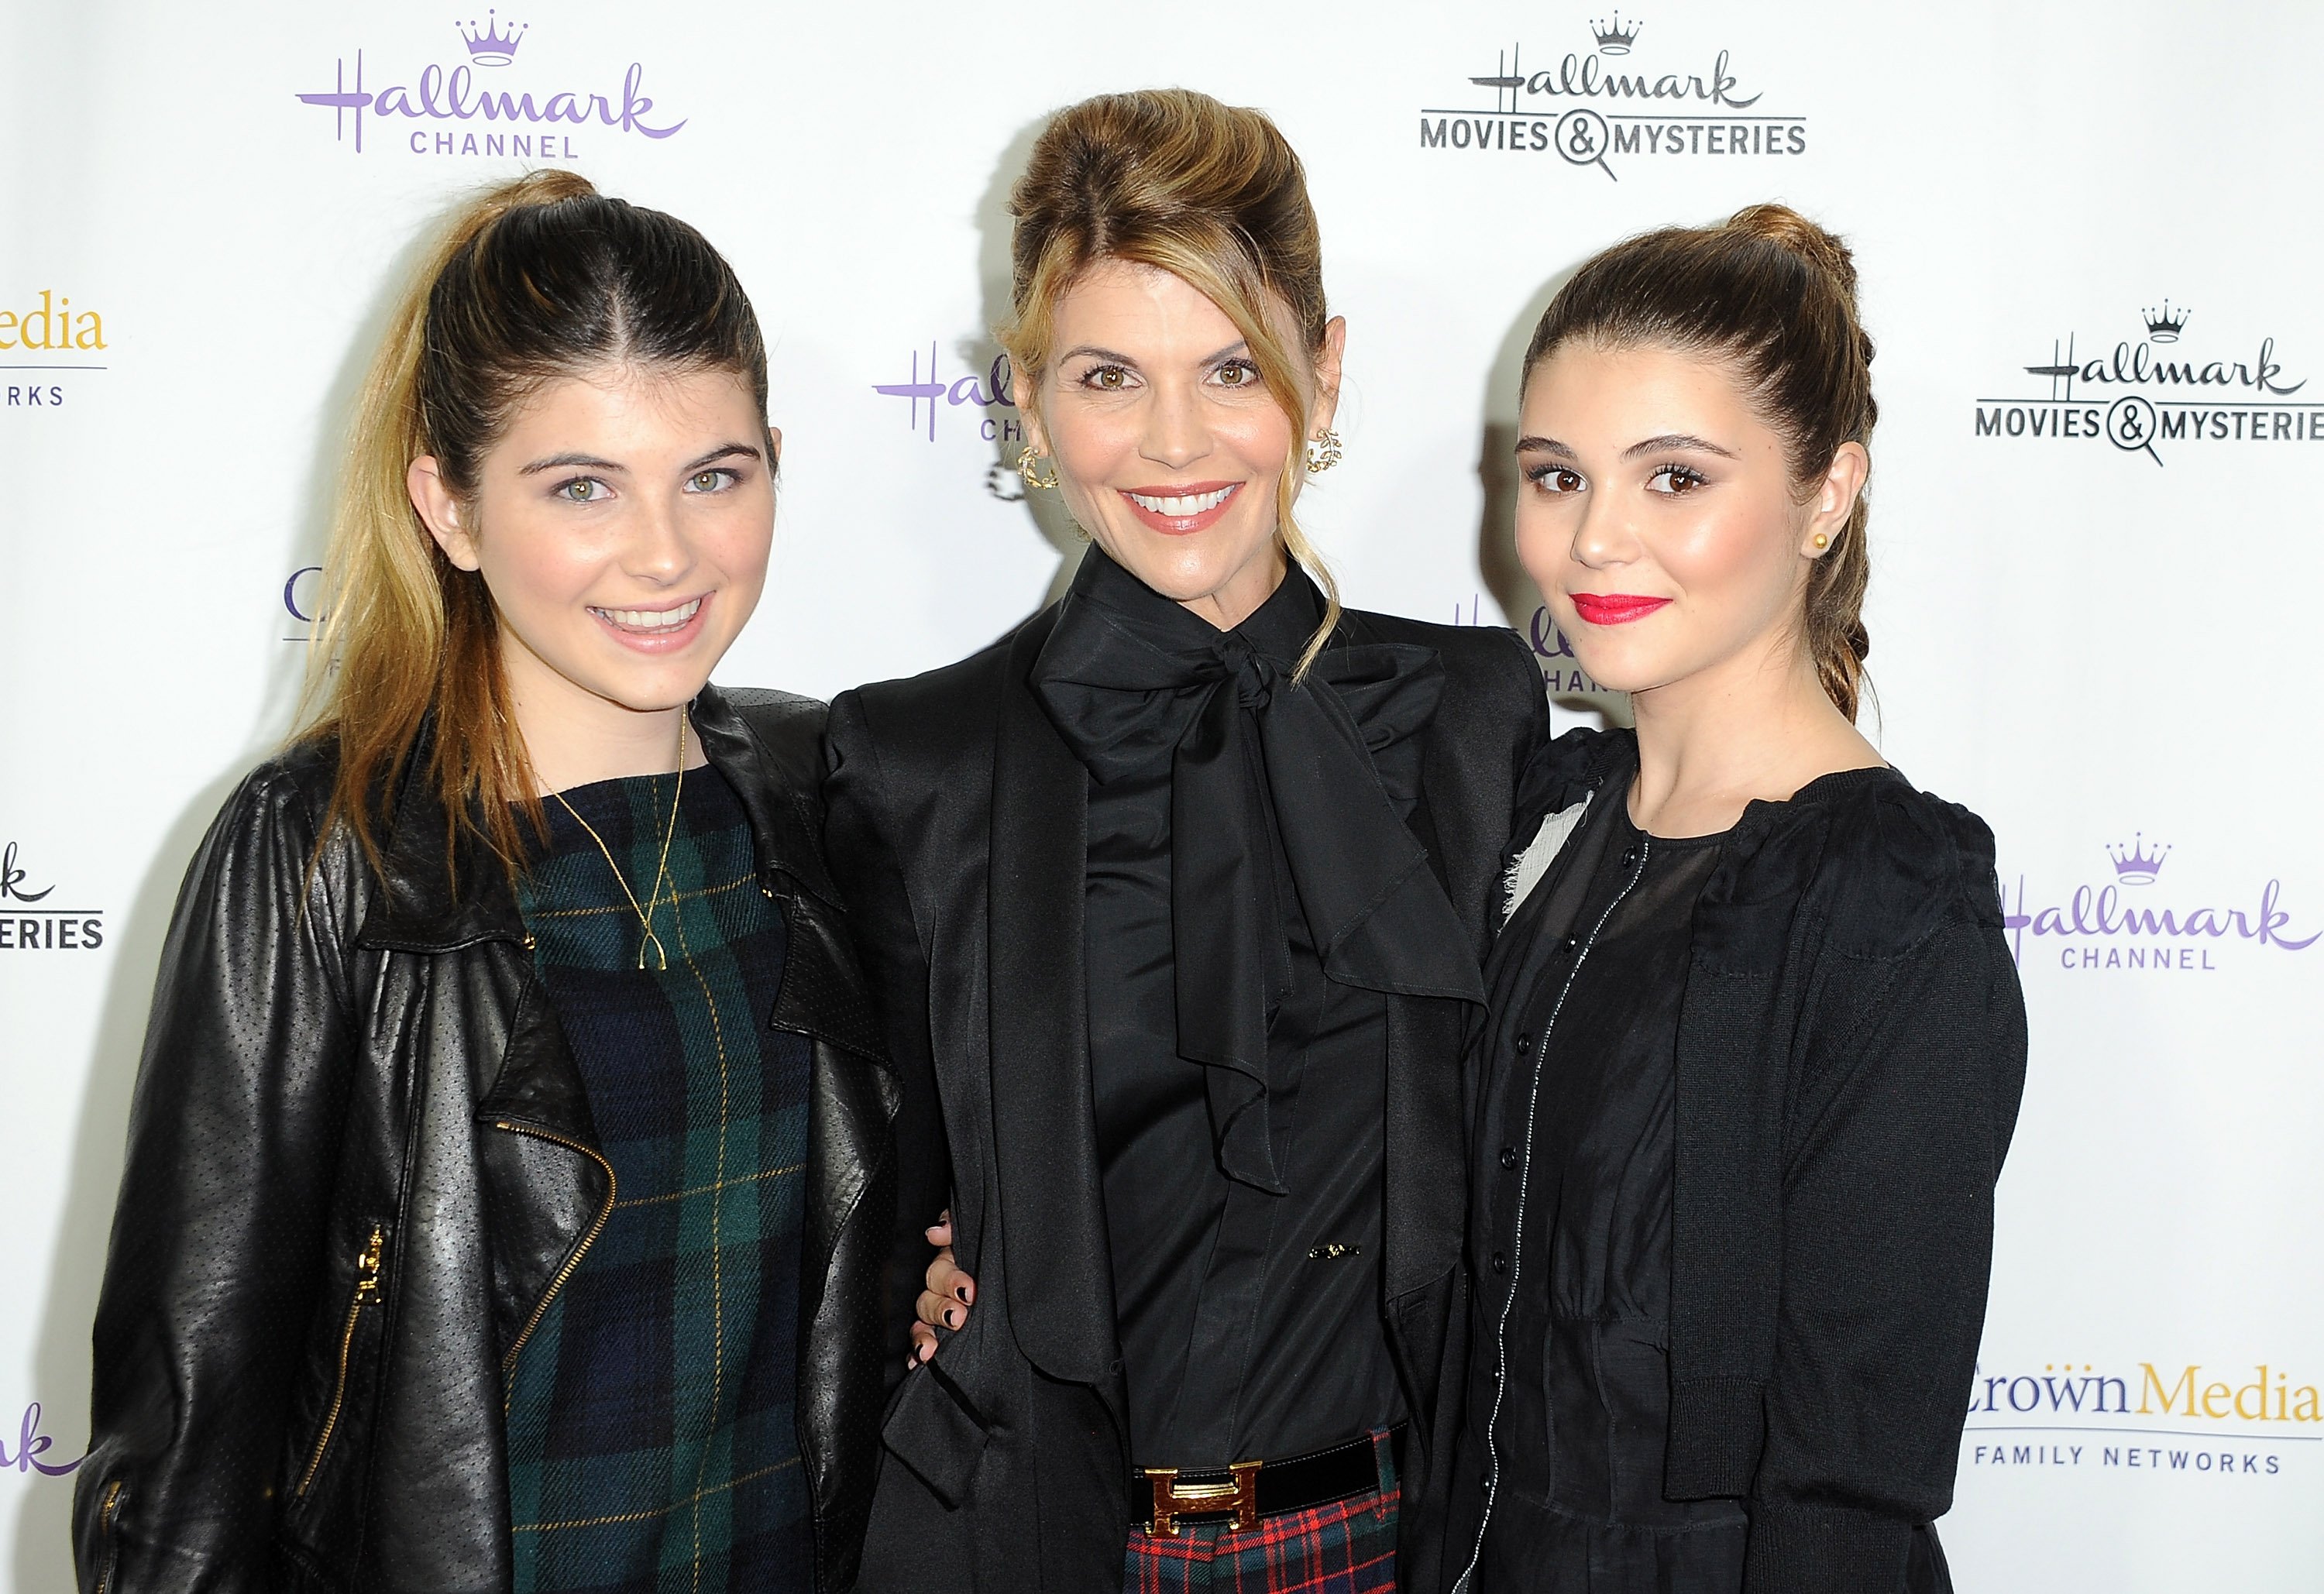  Lori Loughlin and her daughters Isabella Giannulli and Olivia Giannulli arrive at Hallmark Channel's annual holiday event premiere screening of "Northpole" on November 4, 2014. | Source: Getty Images 